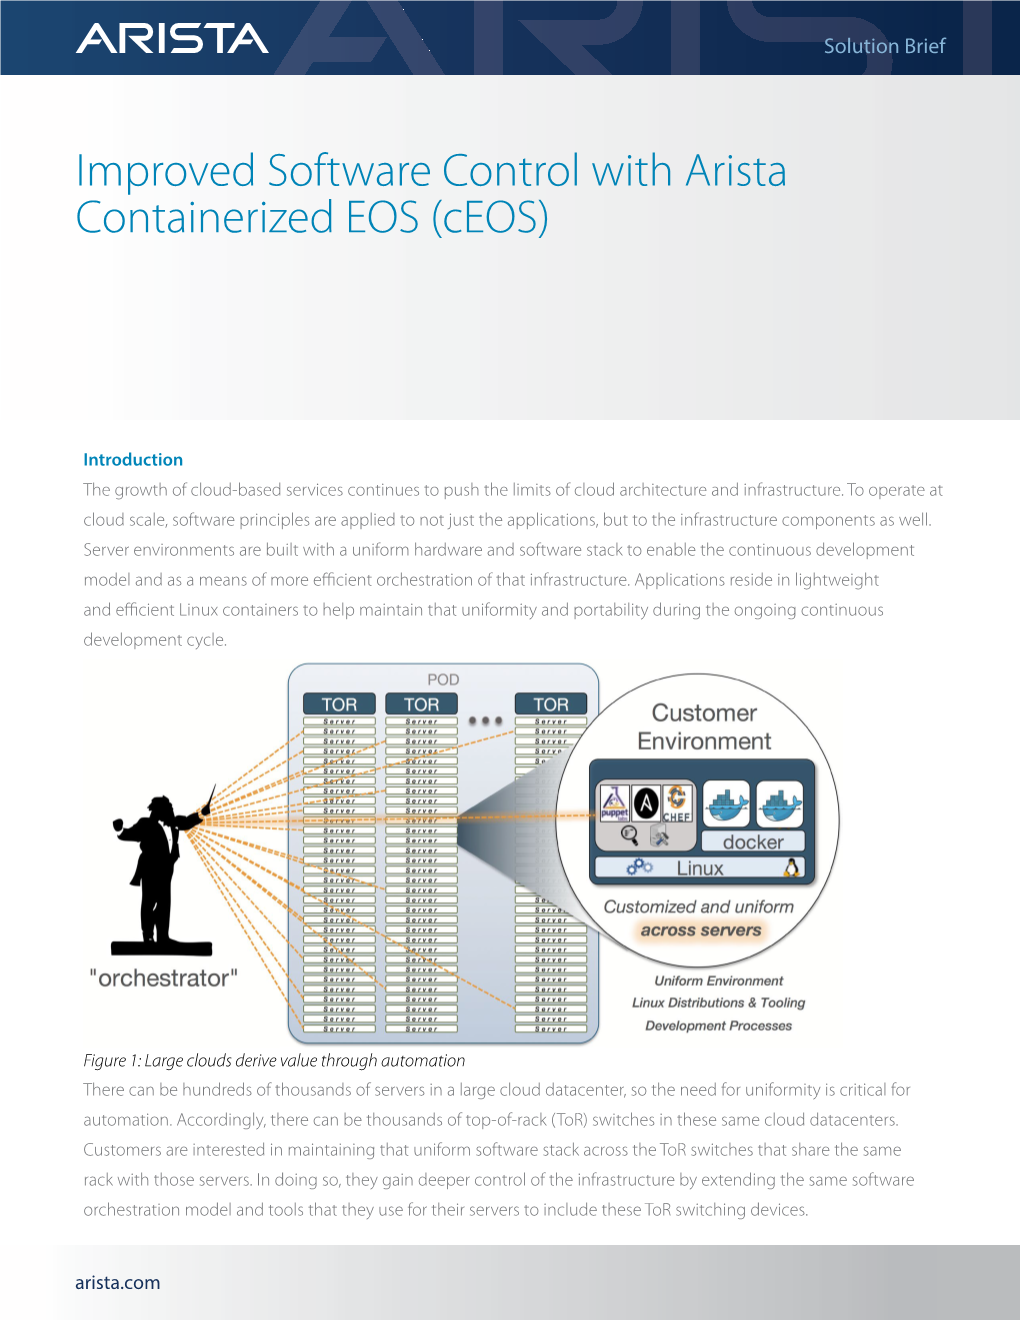 Improved Software Control with Arista Containerized EOS (Ceos)